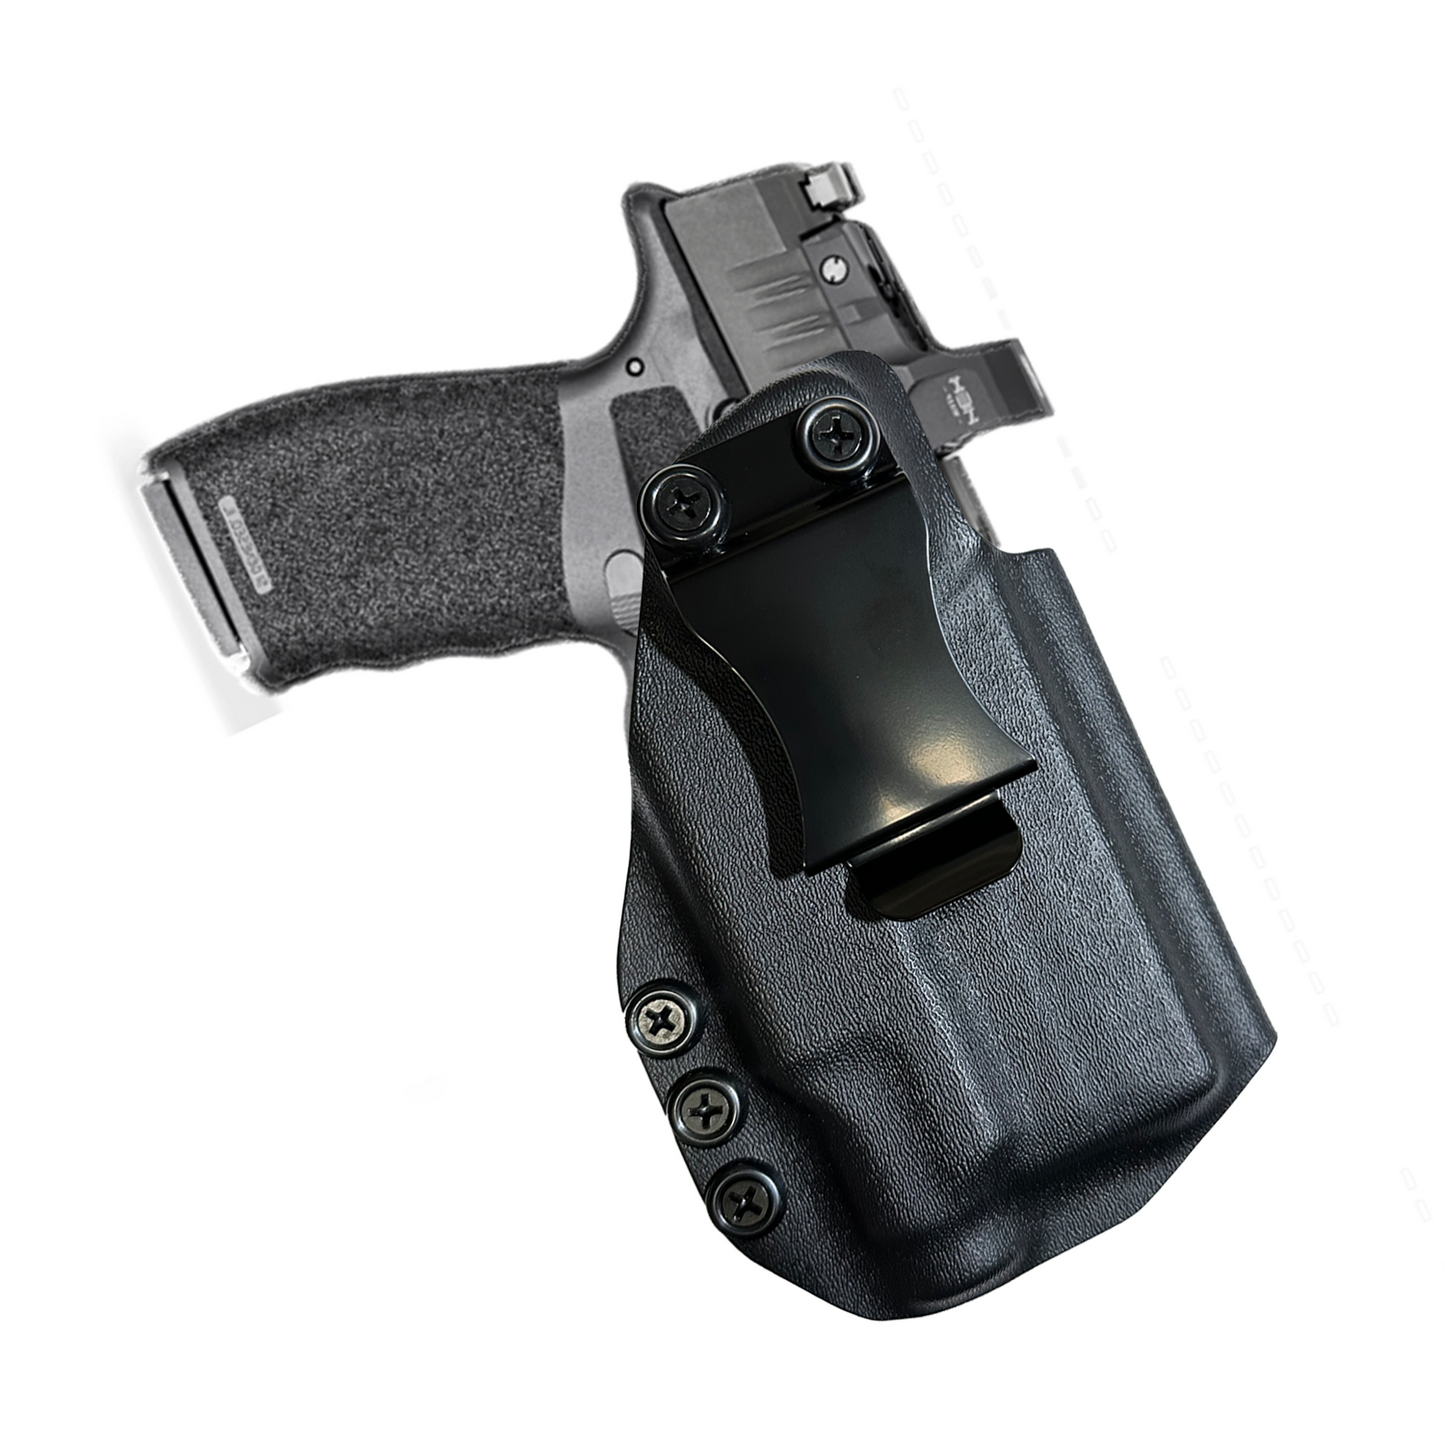 GLOCK 19/ 19X With TLR7 Light IWB (Inside The Waistband Holster)